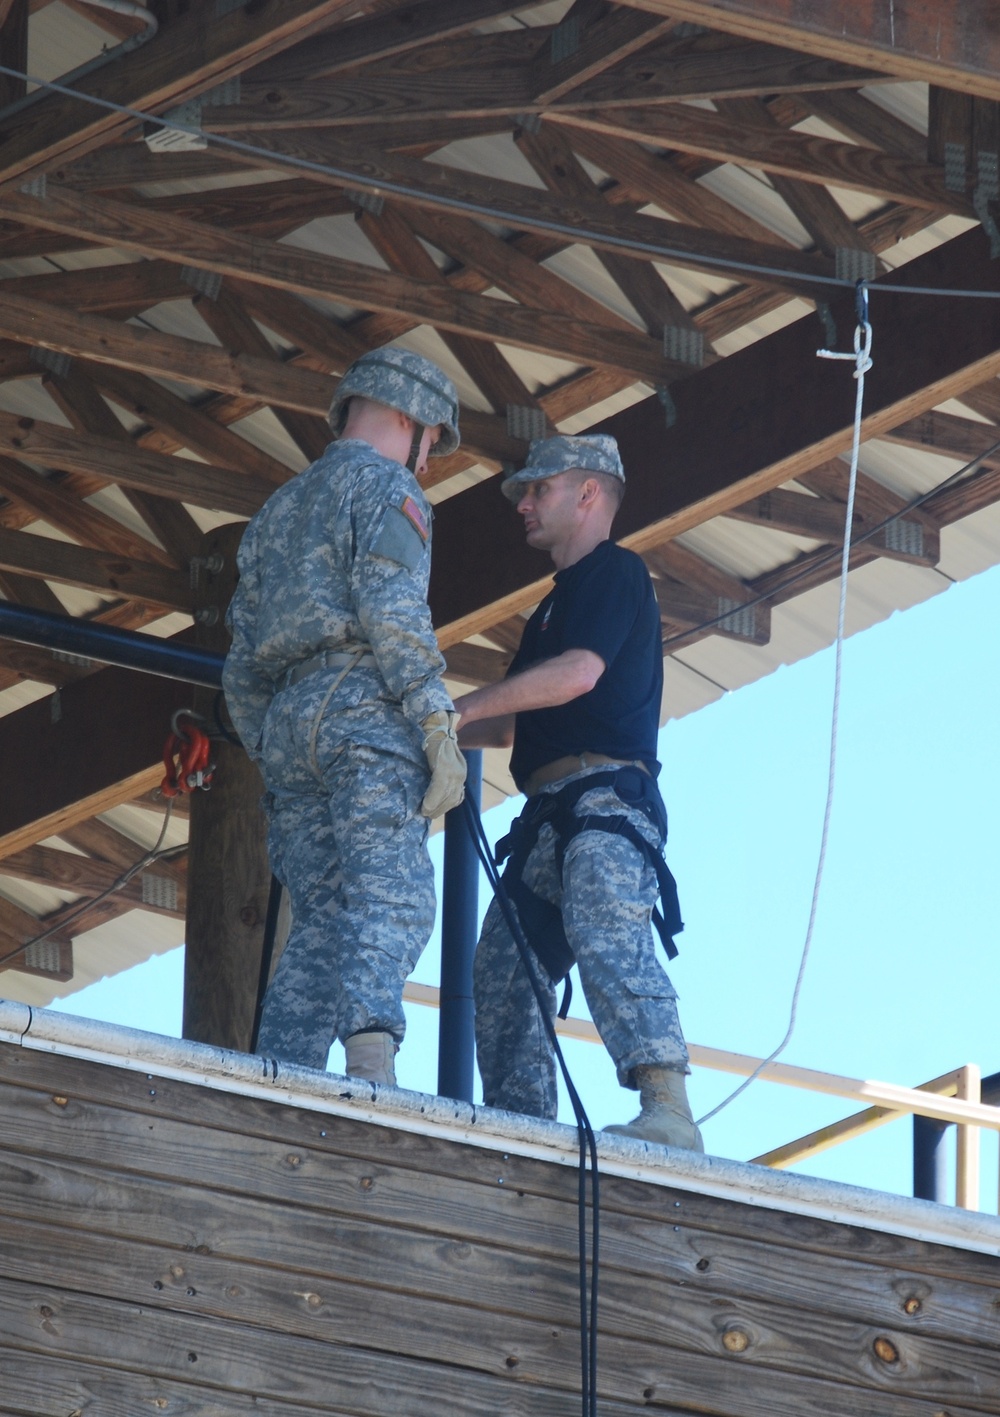 NC Guard assists NC State ROTC cadets with training